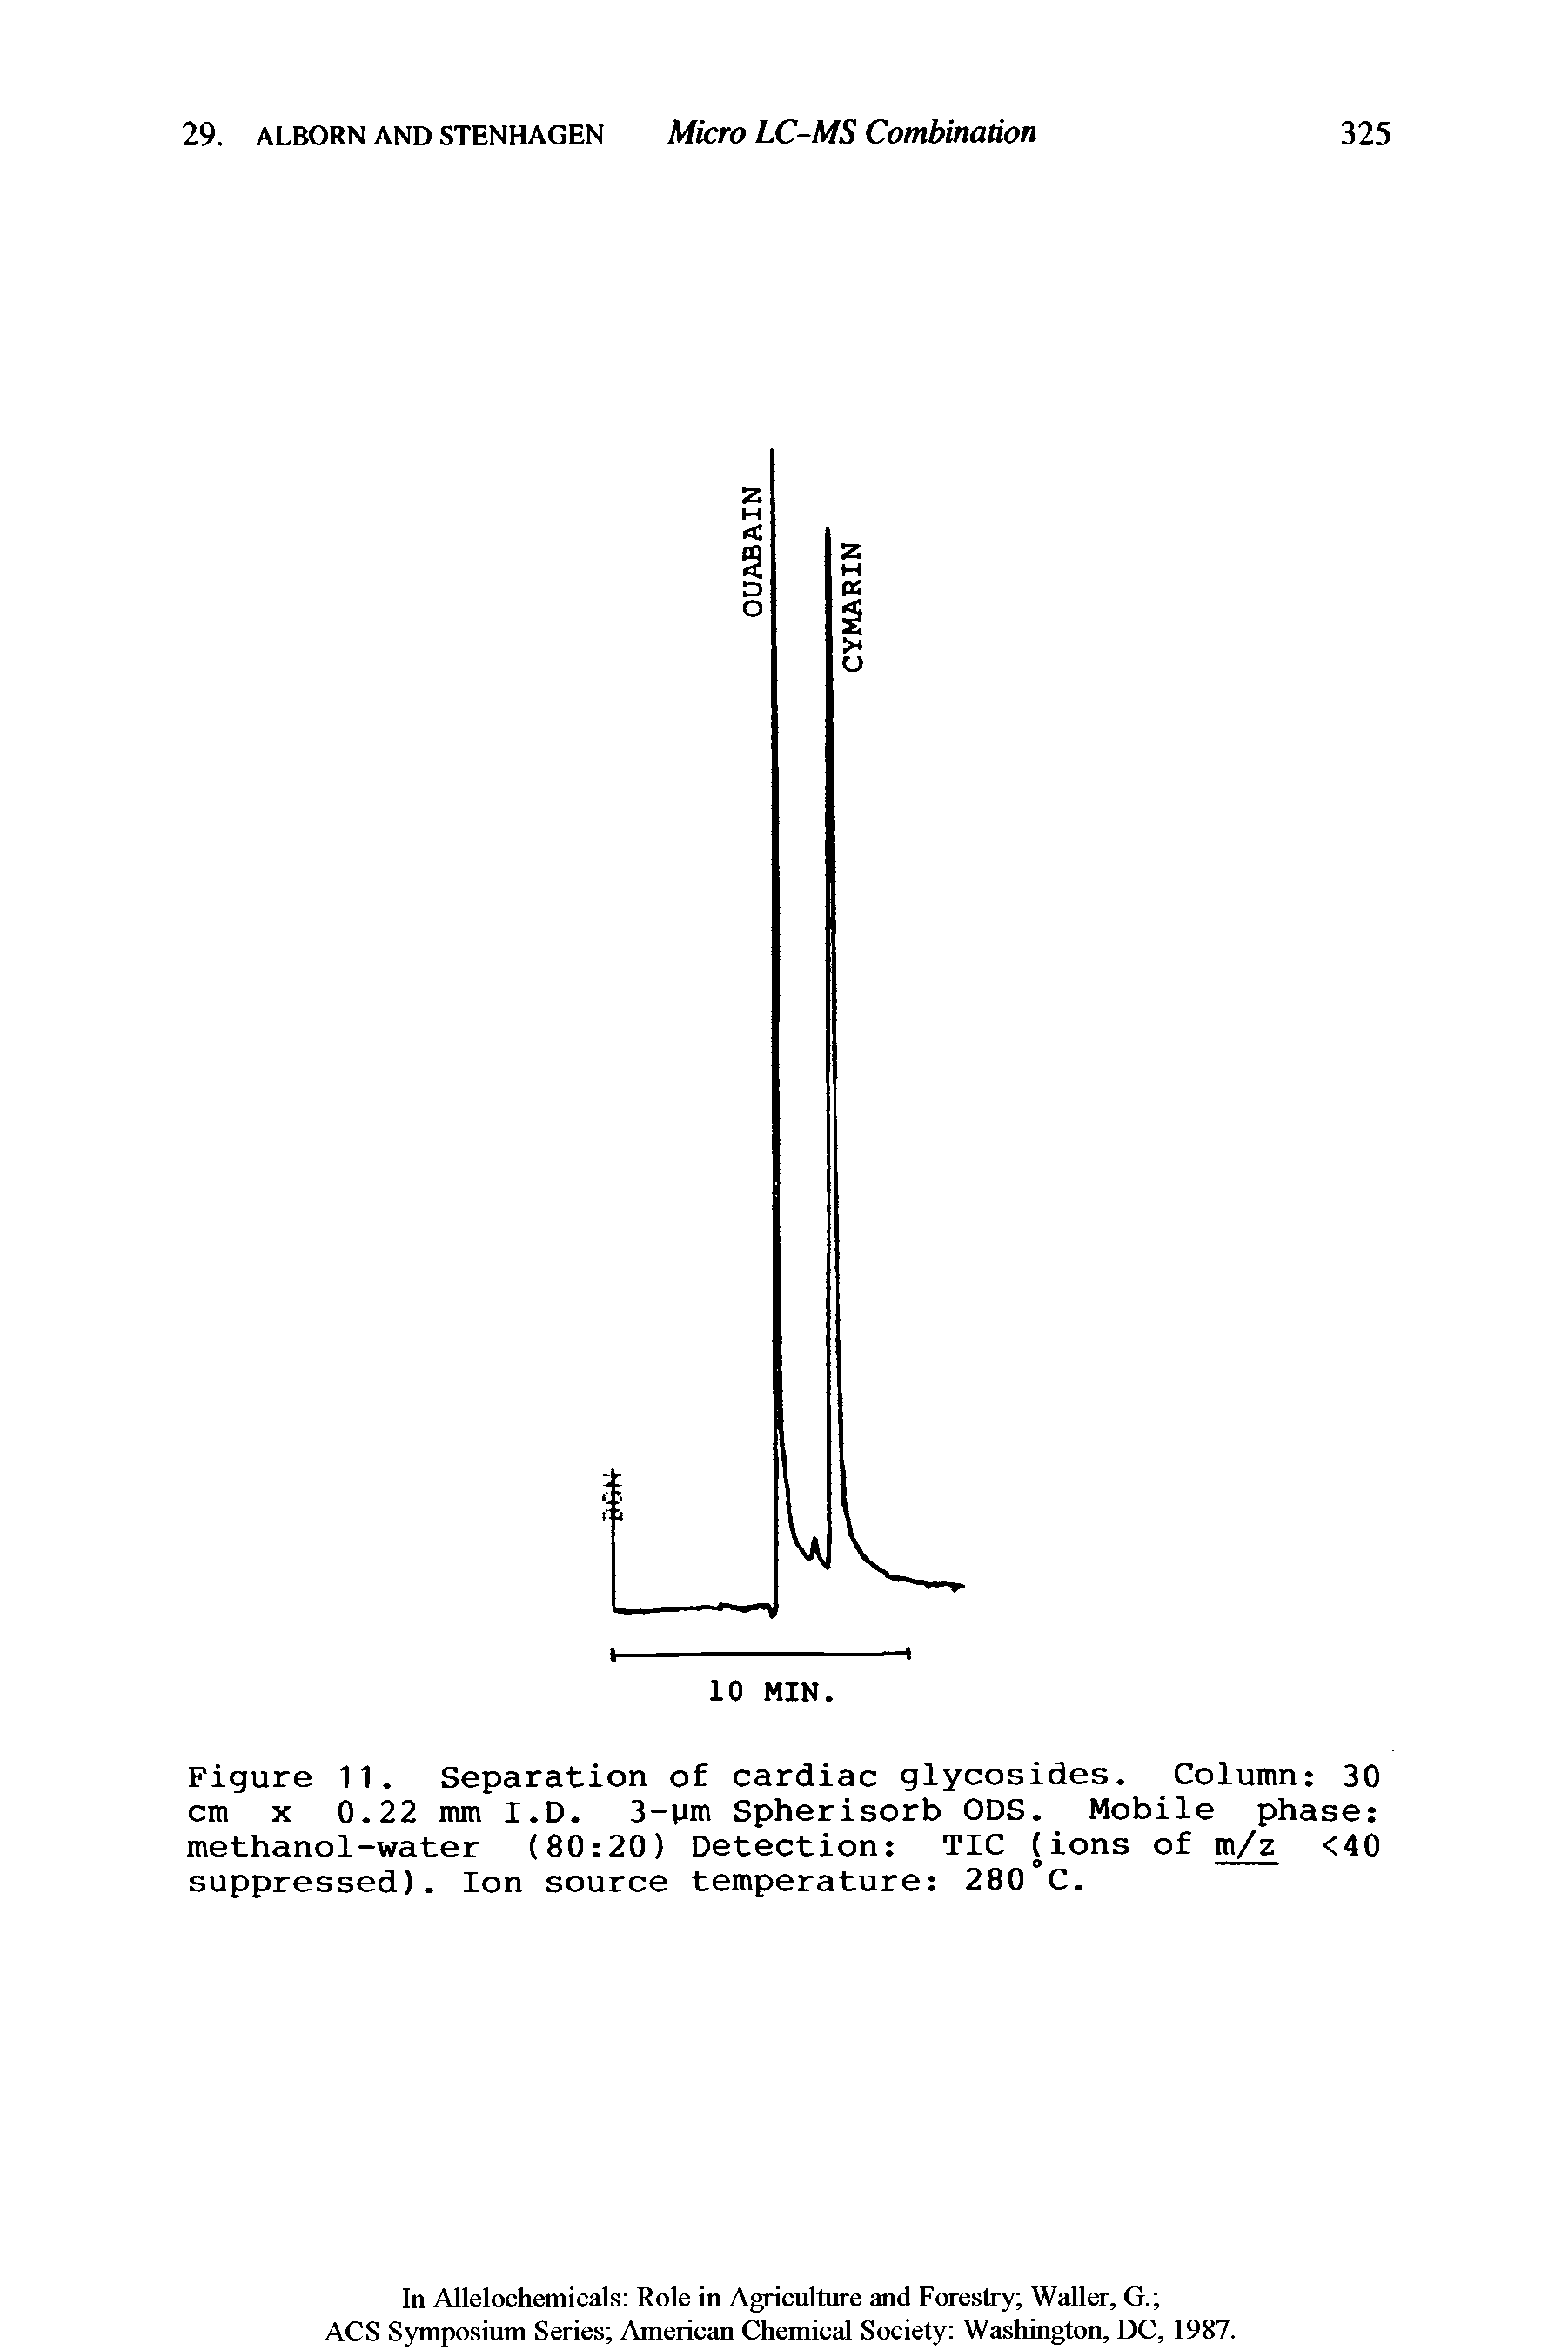 Figure 11. Separation of cardiac glycosides. Column 30 cm X 0.22 mm I.D. 3-vim Spherisorb ODS. Mobile phase methanol-water (80 20) Detection TIC (ions of m/z <40 suppressed). Ion source temperature 280°C.